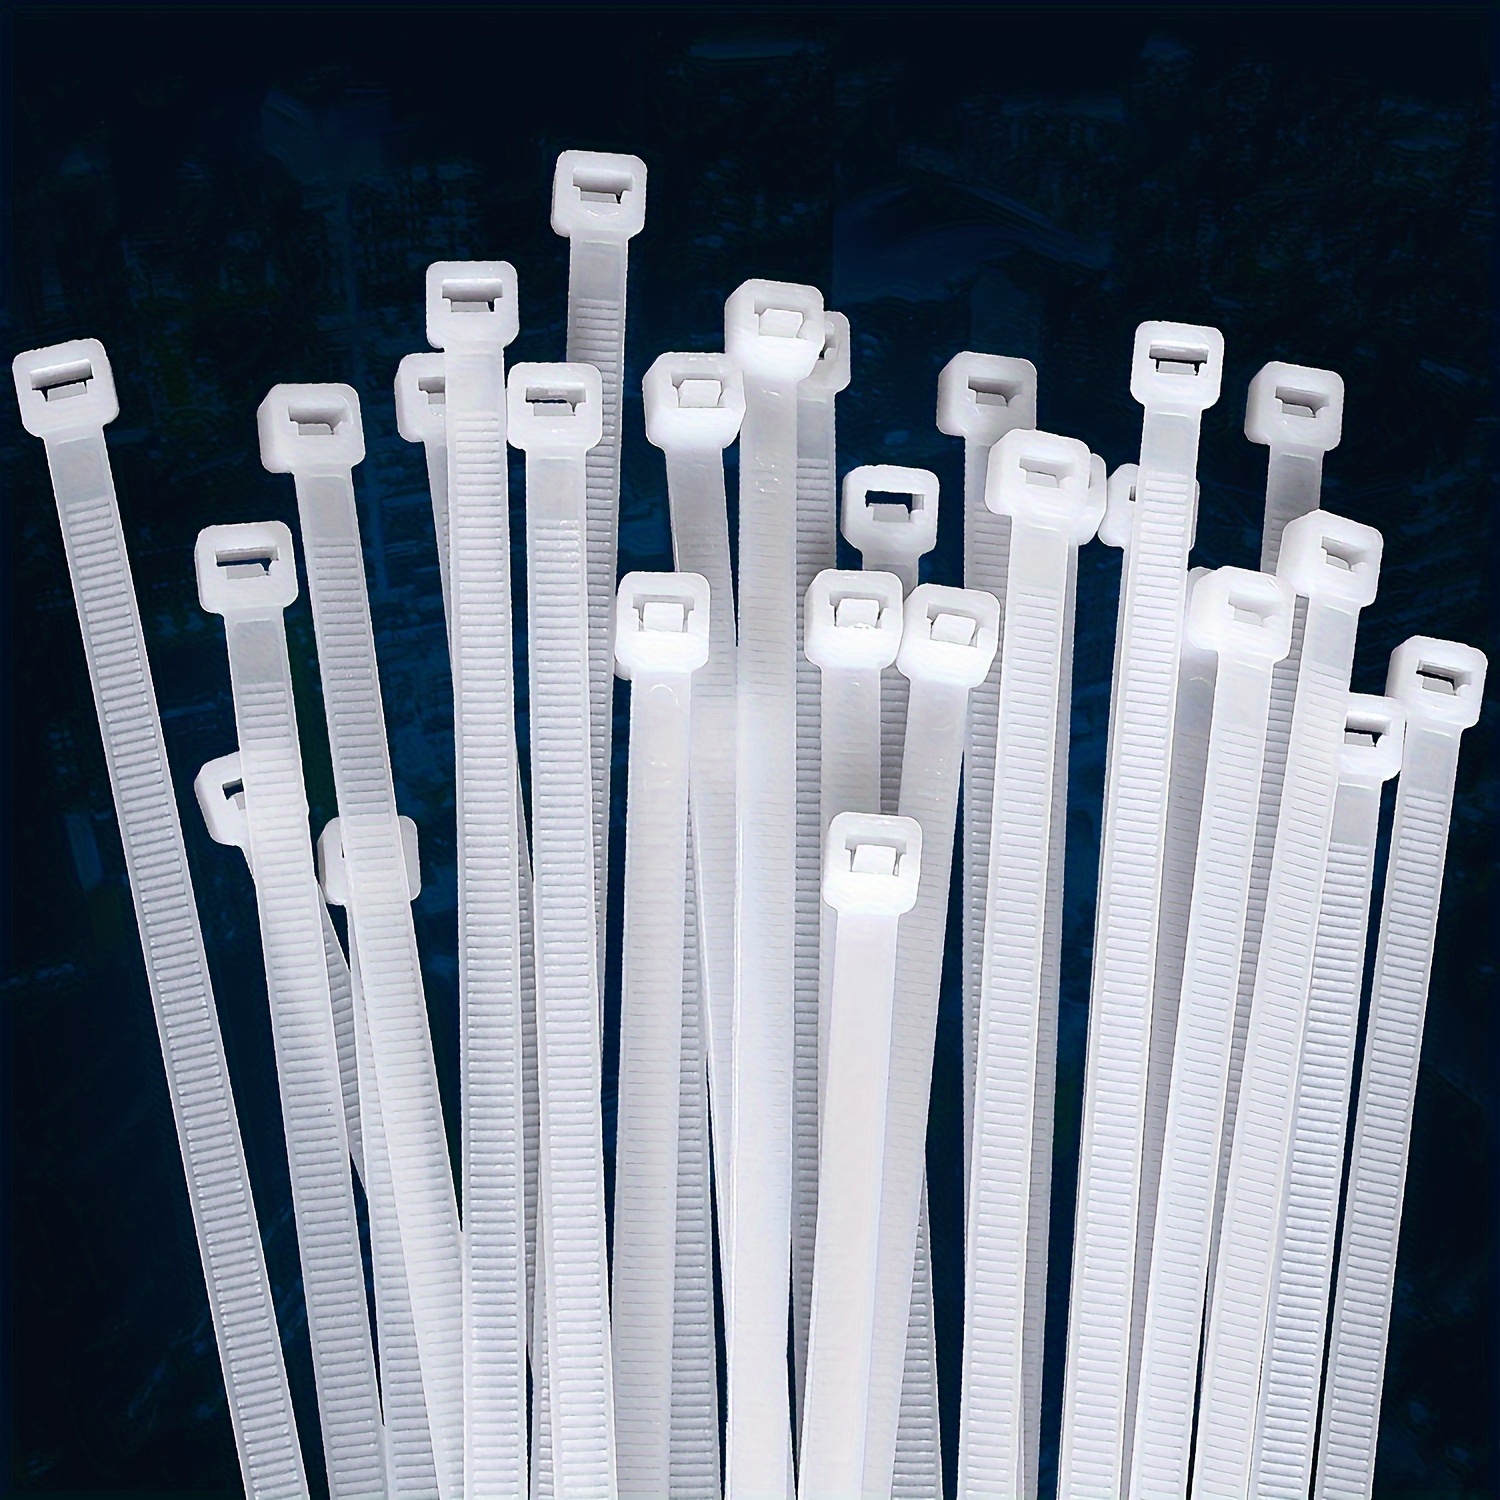 

100pcs Cable Zip Ties White, The Maximum Tensile Strength Of Premium Plastic Wire Ties Clear Is 50 Pounds, Self-locking Nylon White Zip Ties For Indoor And Outdoor (4in/ 6in/ 8in/ 12in)